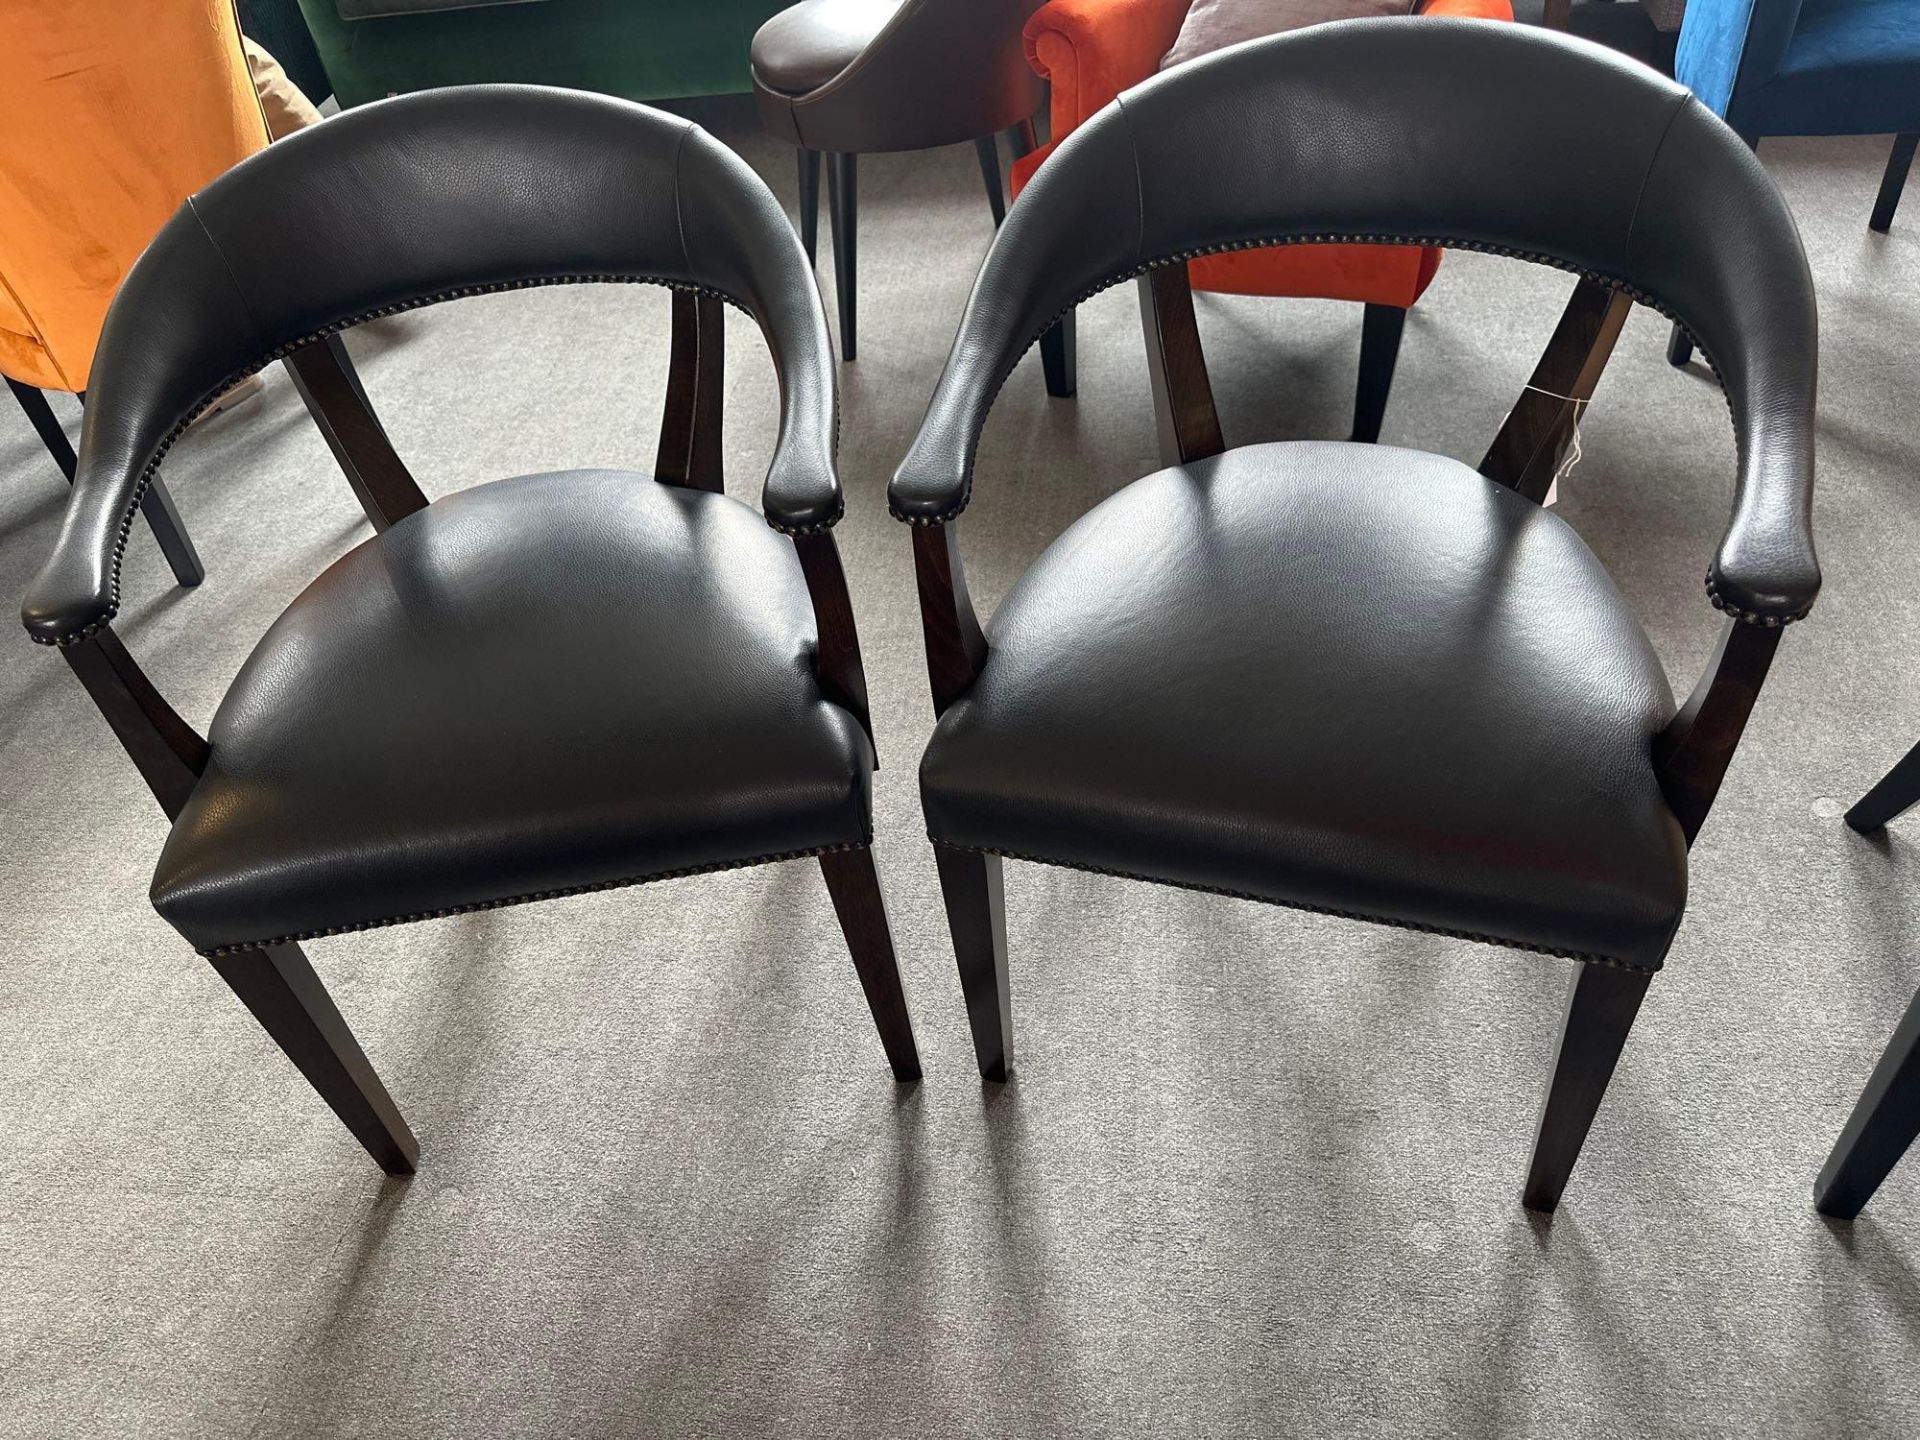 A Pair Of Sepele Arm Chairs, A Pair Of Exquisitely Designed Formal Armchairs That Promise To Elevate